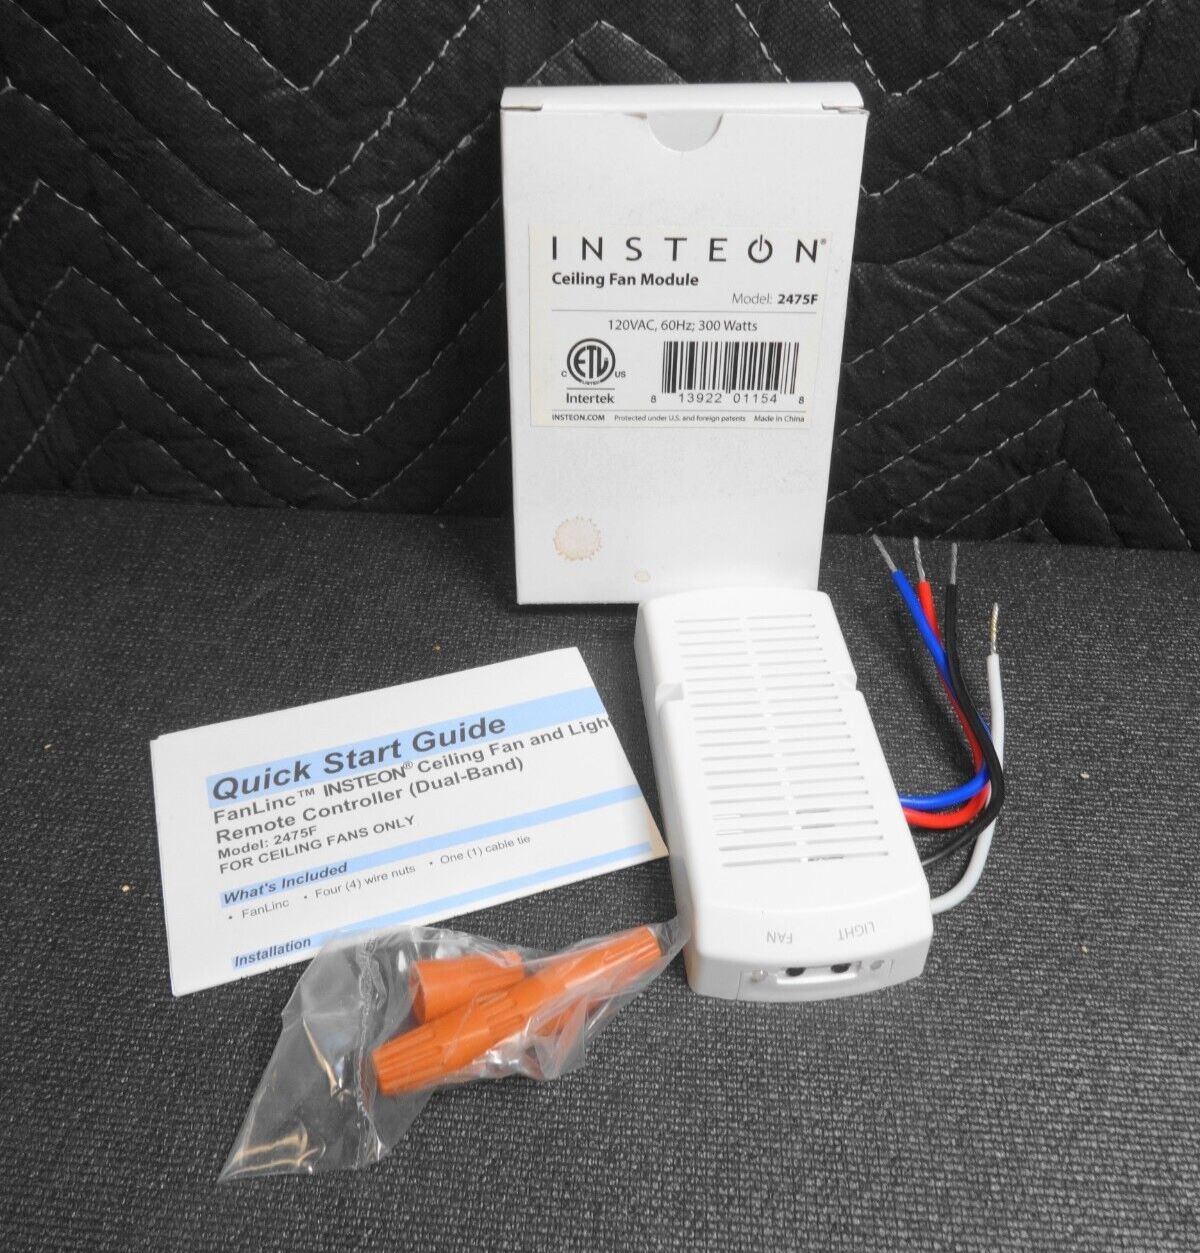 INSTEON 2475F Fan and Light Control Module (NEW IN BOX)